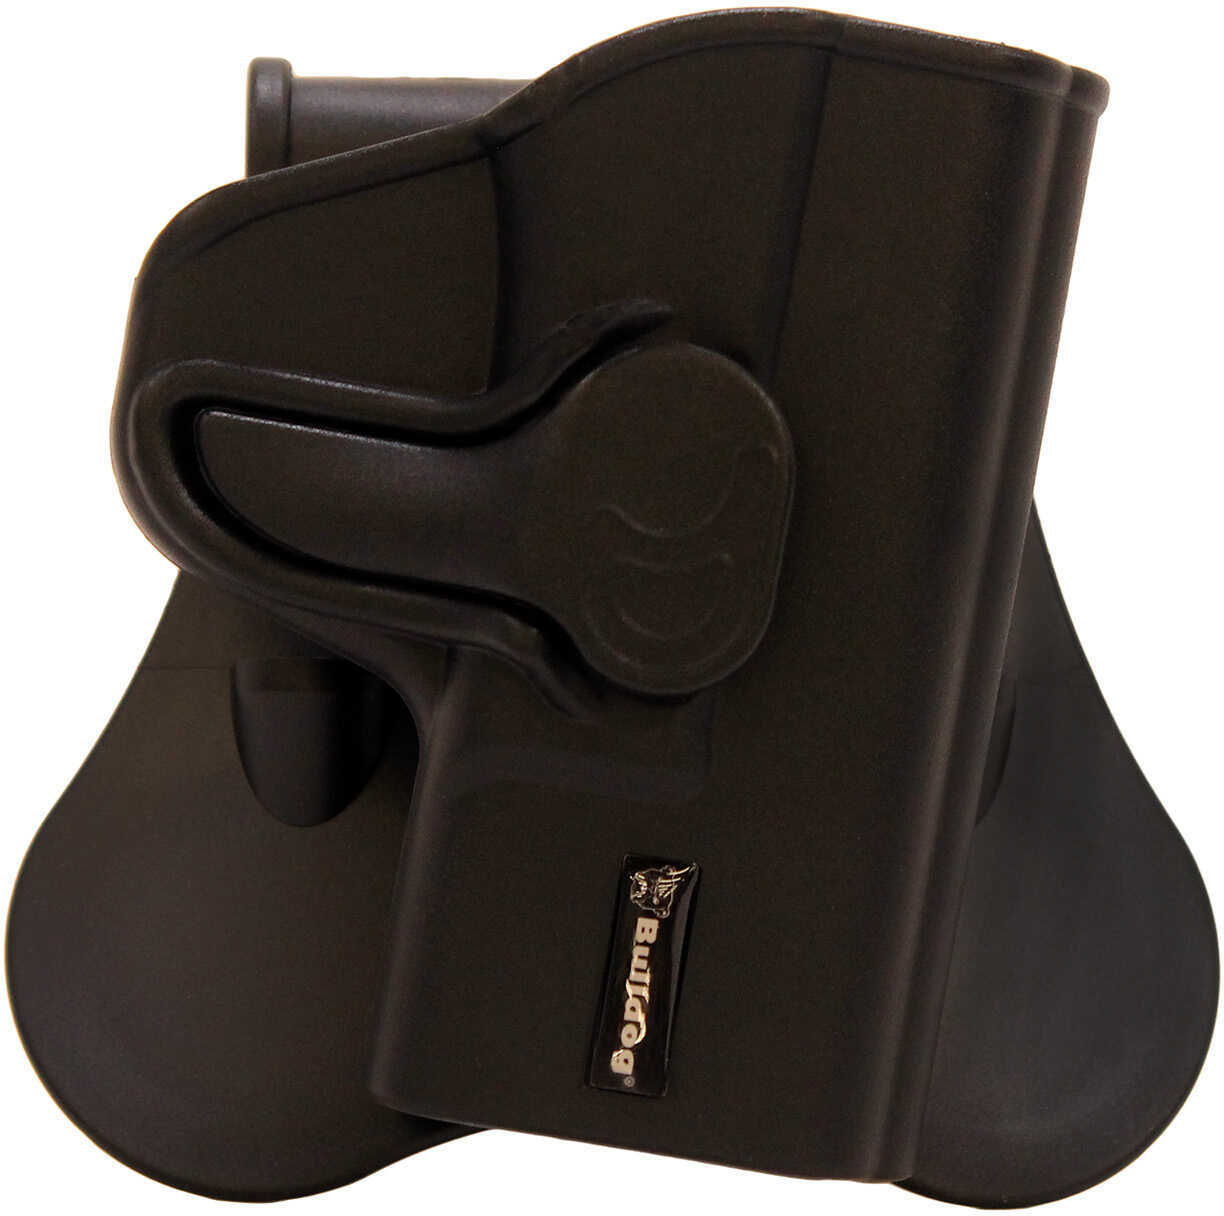 Bulldog Cases Rapid Release Polymer Holster Smith & Wesson M&P Shield, Black, Right Hand Md: RR-SWMPS